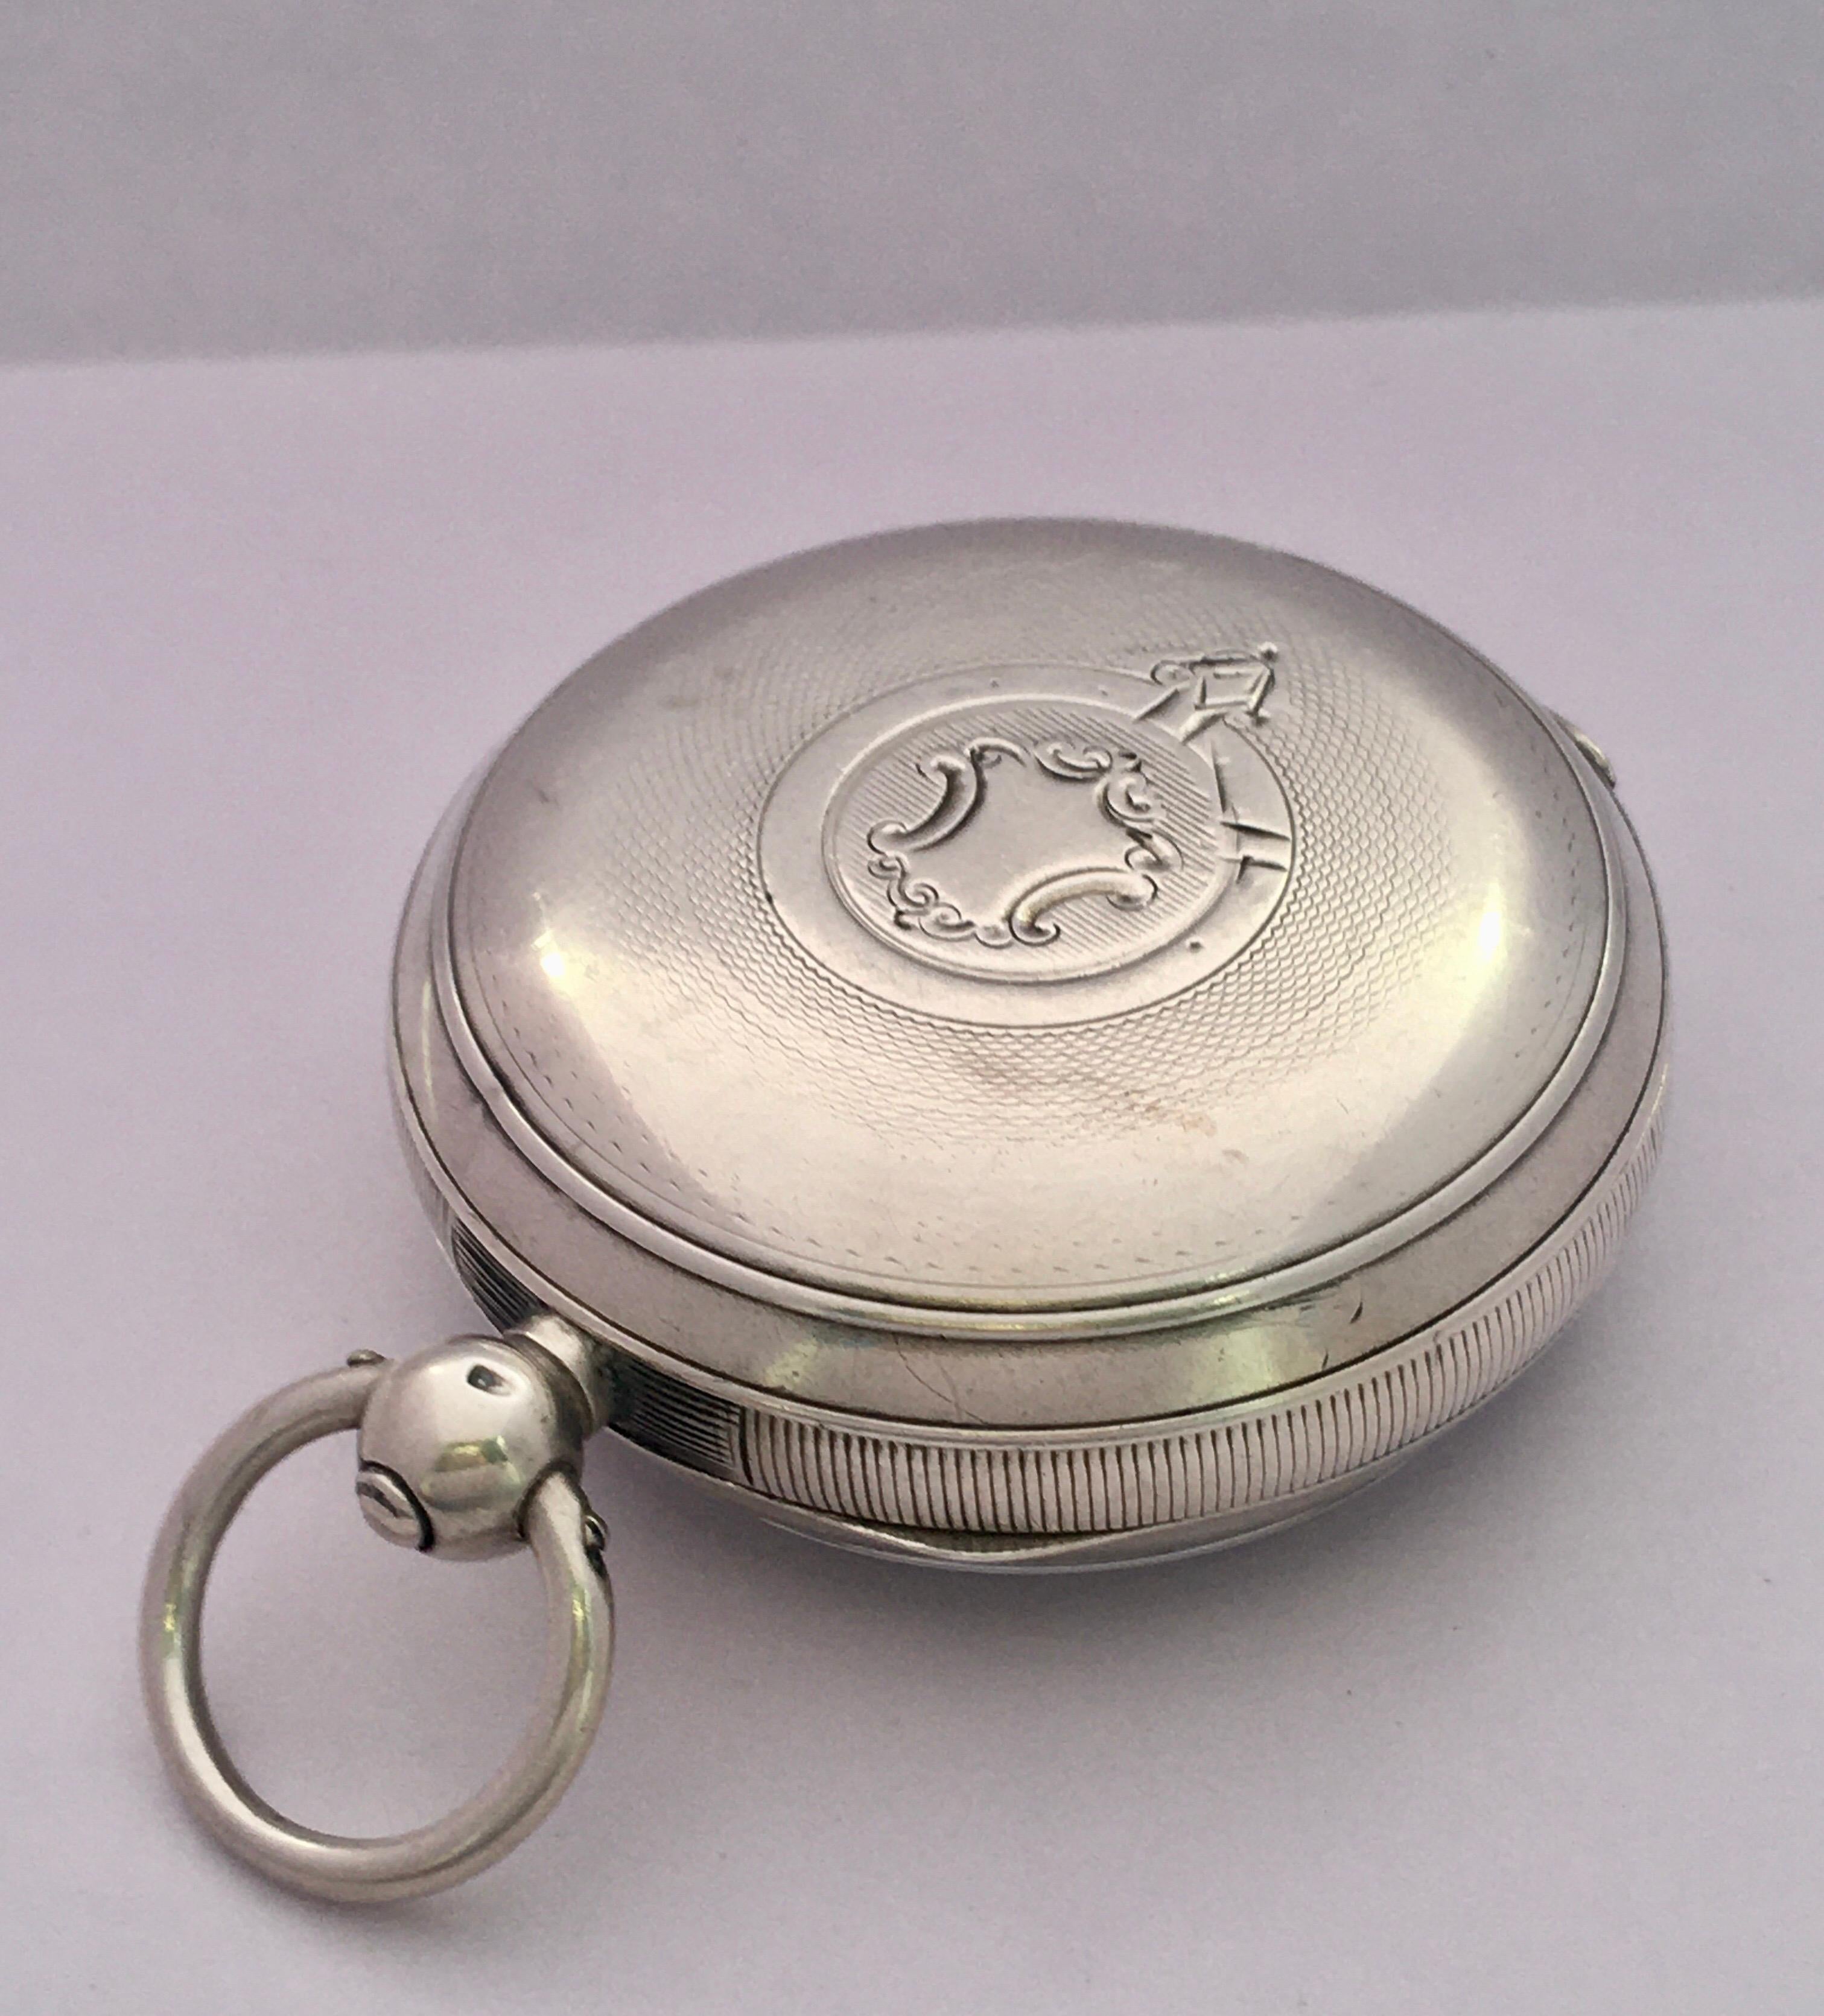 Antique Silver Key-Winding Pocket Watch Signed by Dent 3